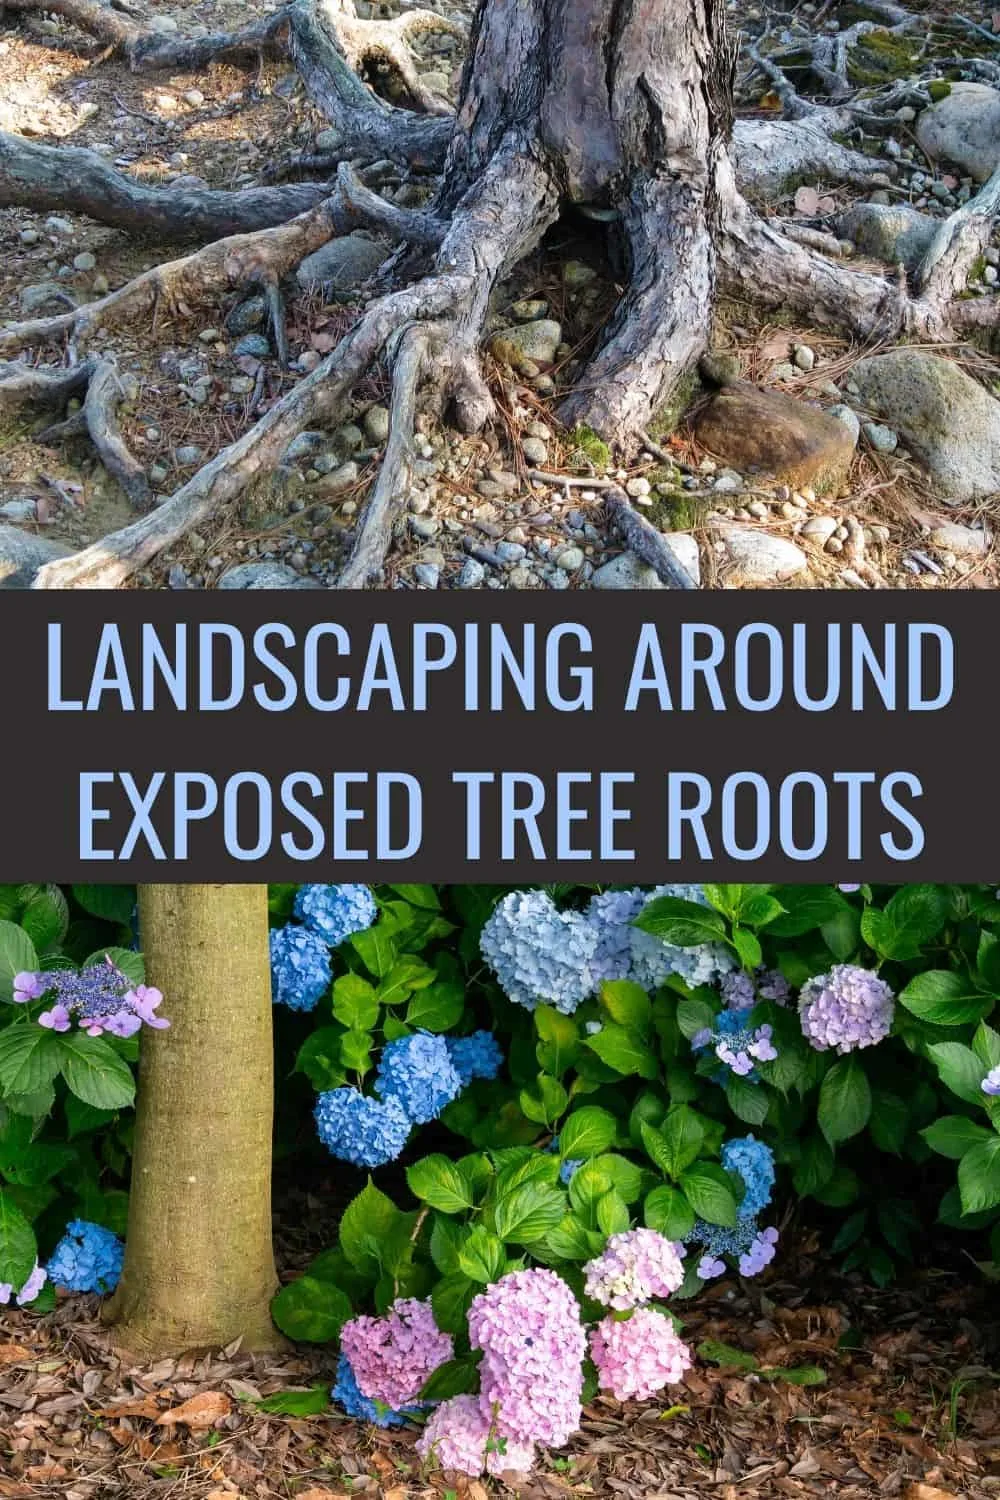 Landscaping around exposed tree roots